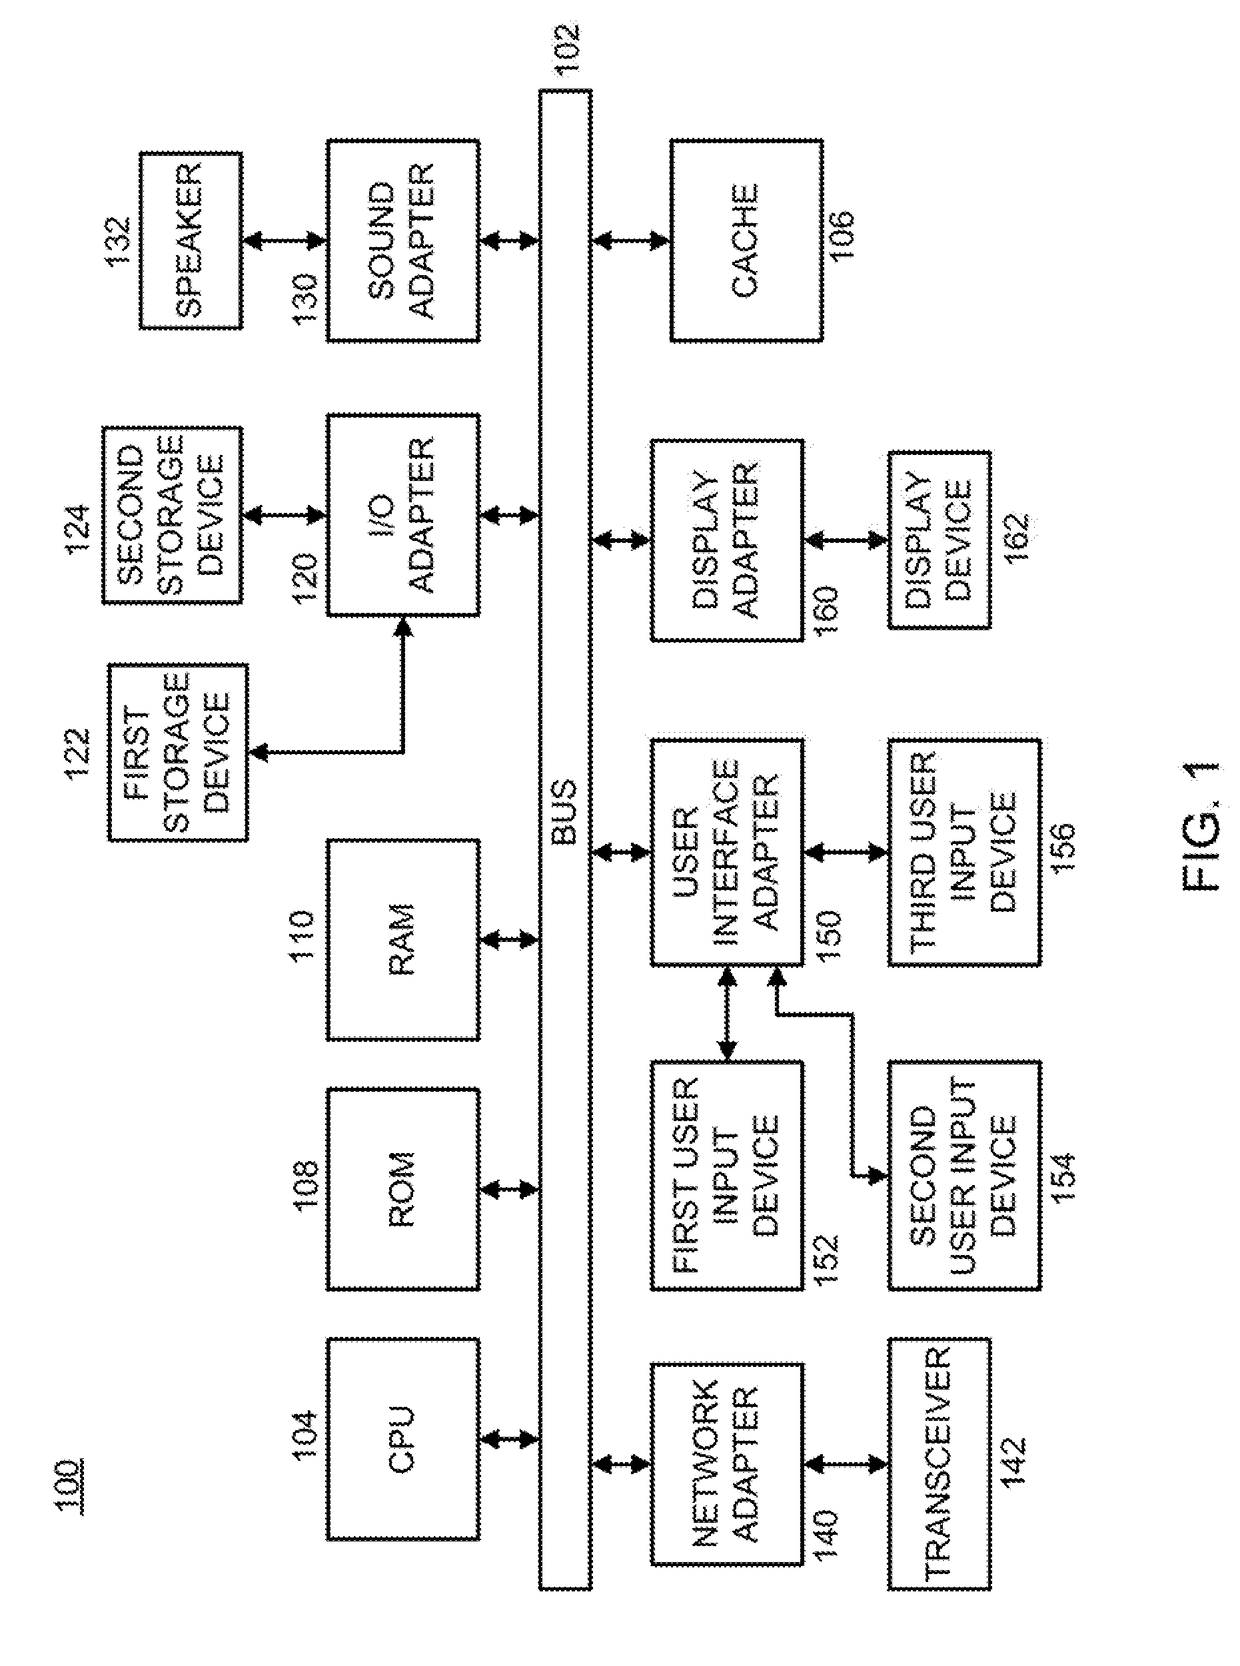 System and method for communication efficient sparse-reduce